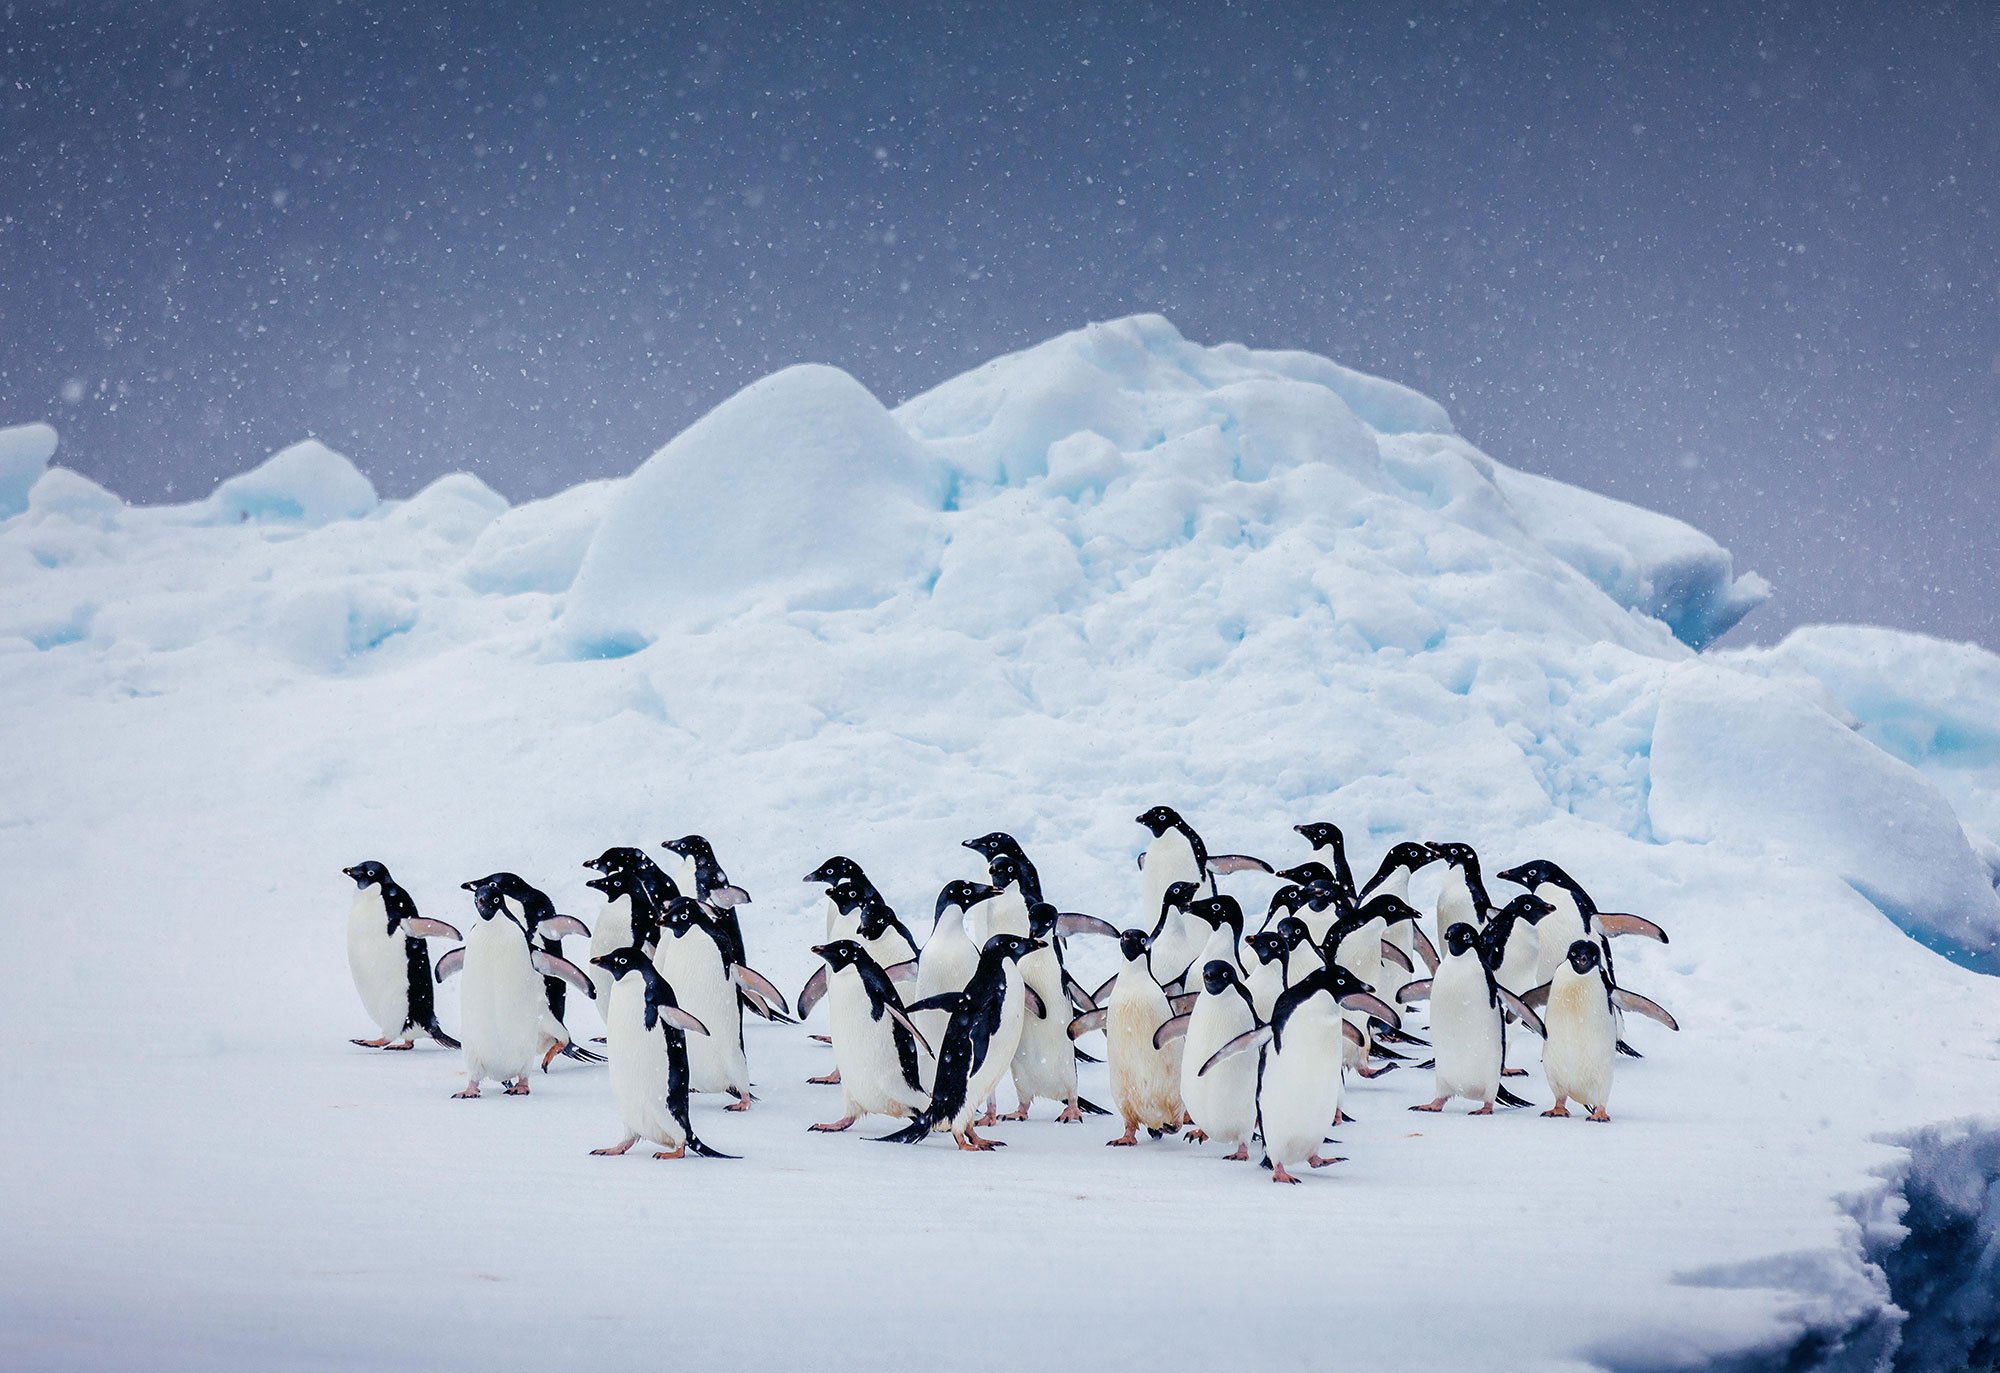 Adelie penguins are small but feisty.